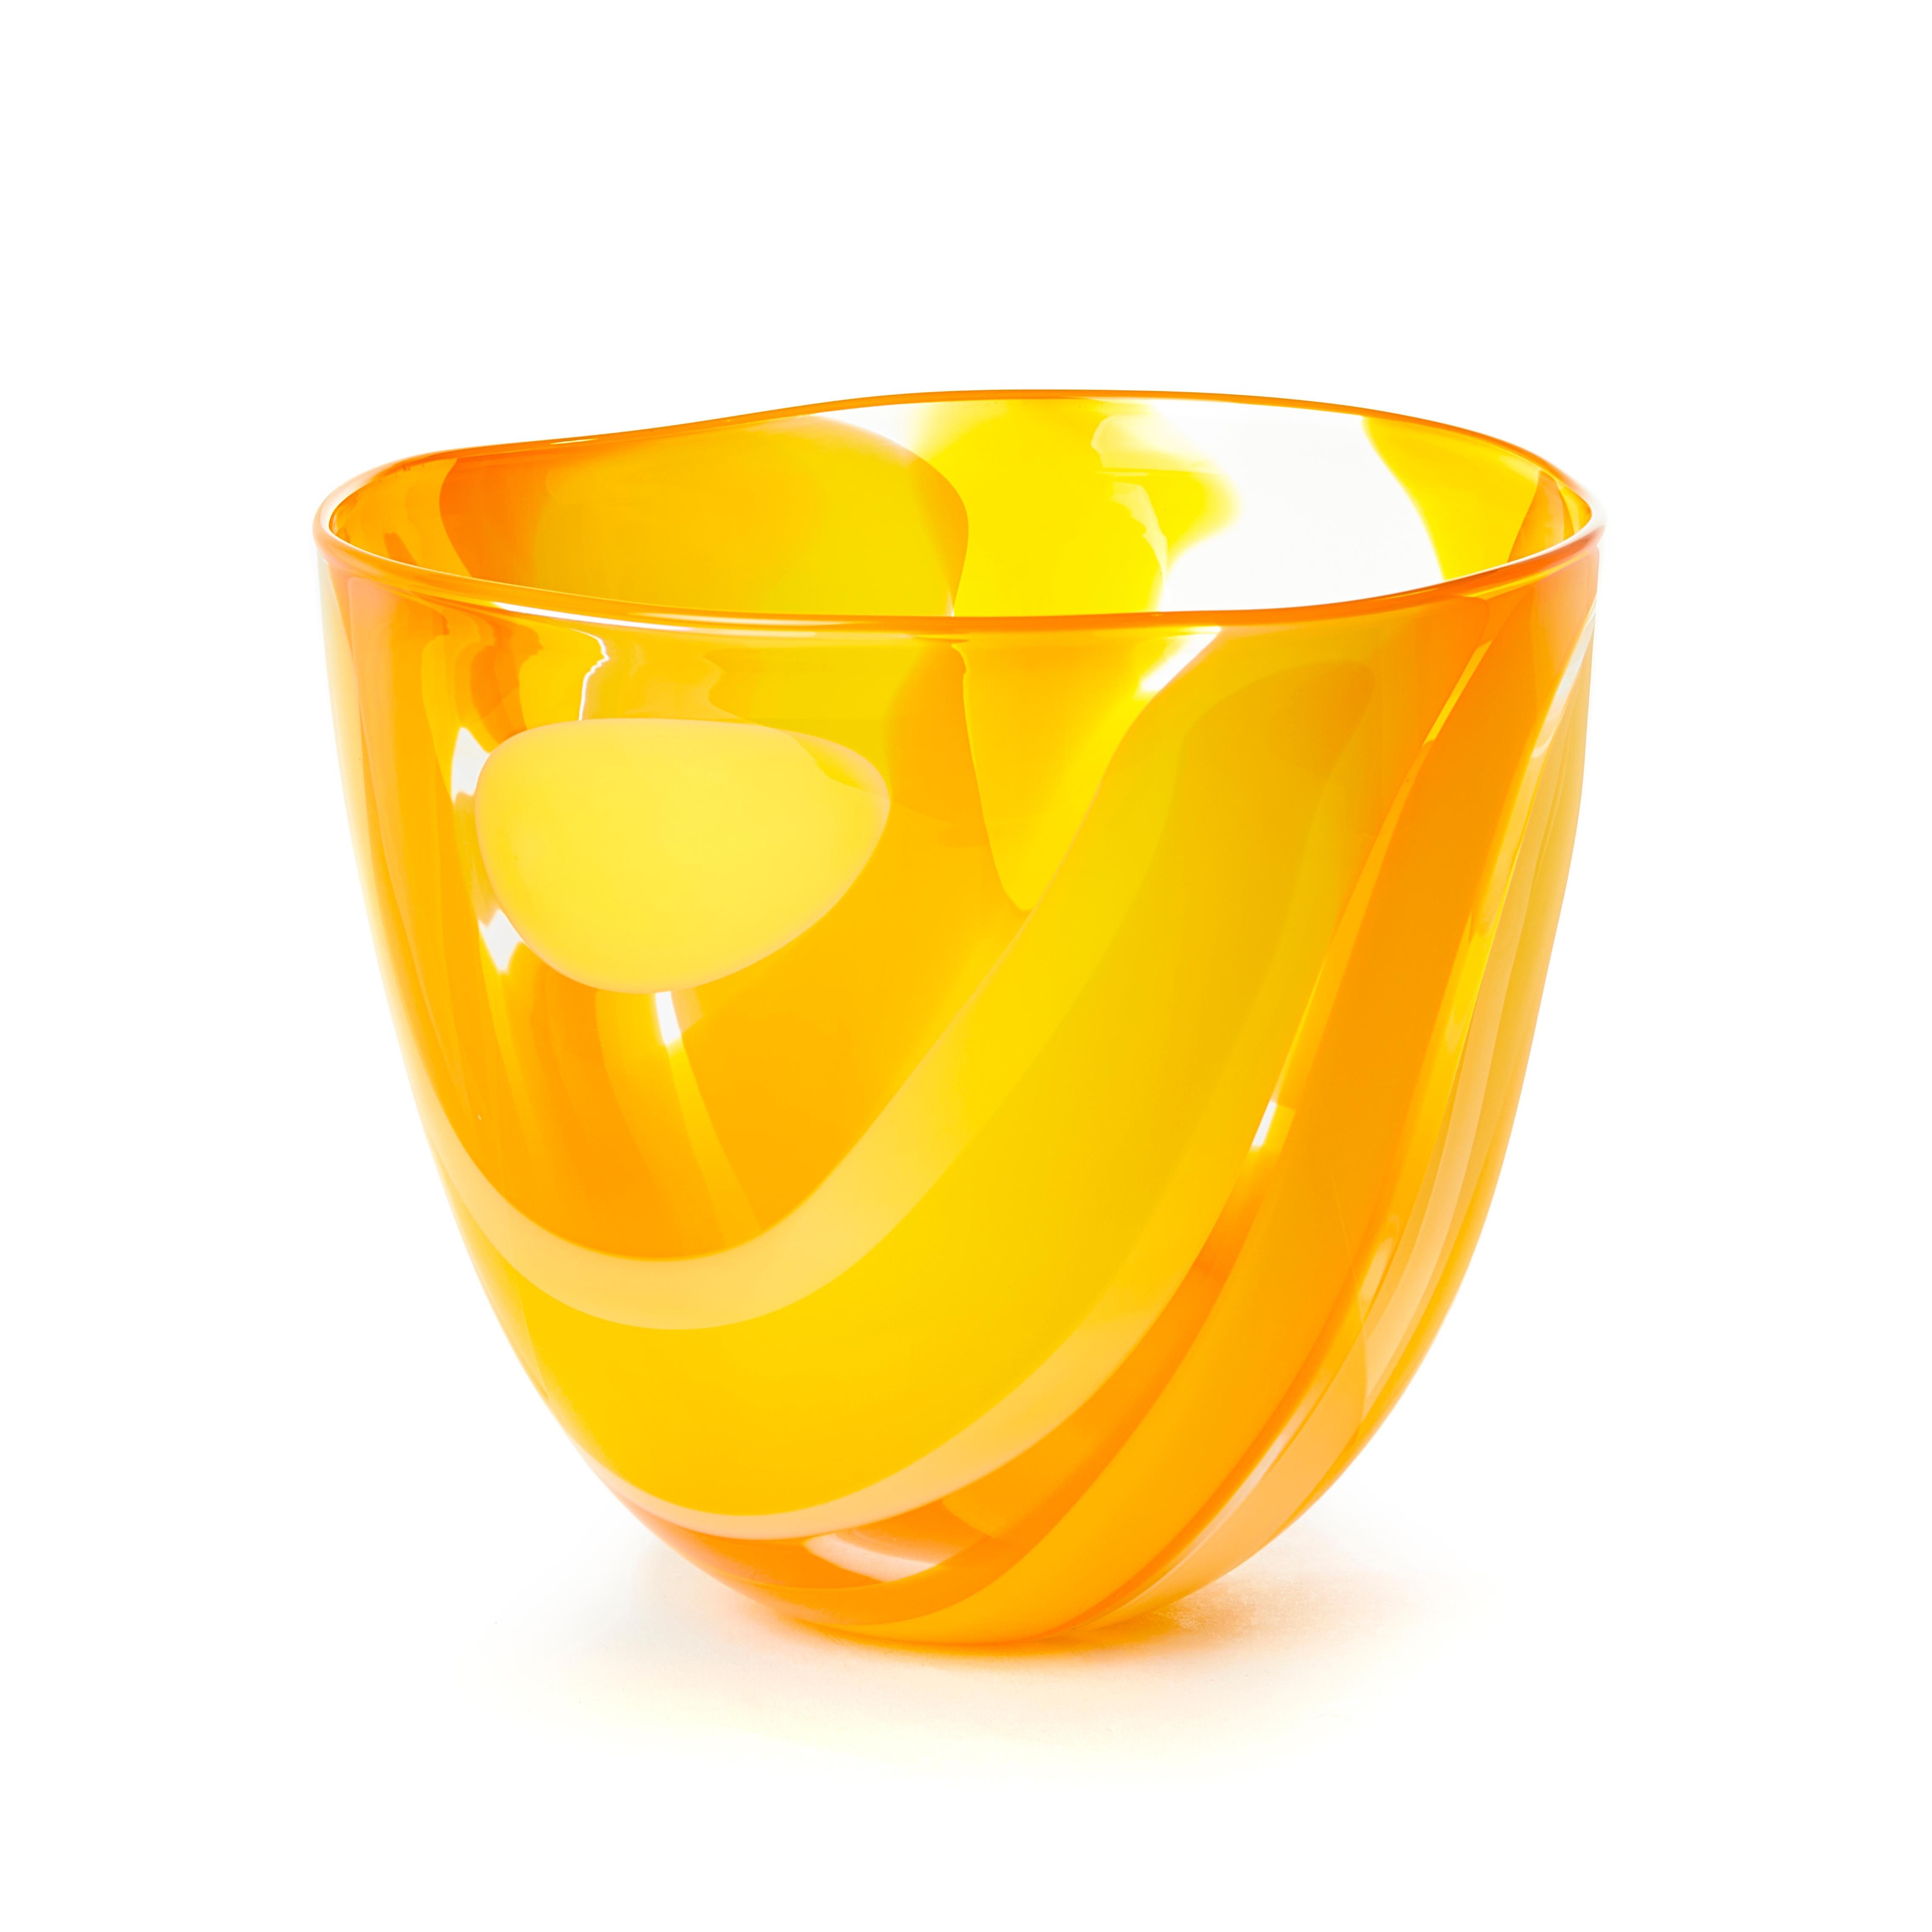 'Waves in yellow and orange' is from a collection of beautifully crafted, unique glass bowls and centerpieces by the British artist Neil Wilkin. Taking a painterly approach, Neil Wilkin merges his colors to create a larger palette of soft hues.